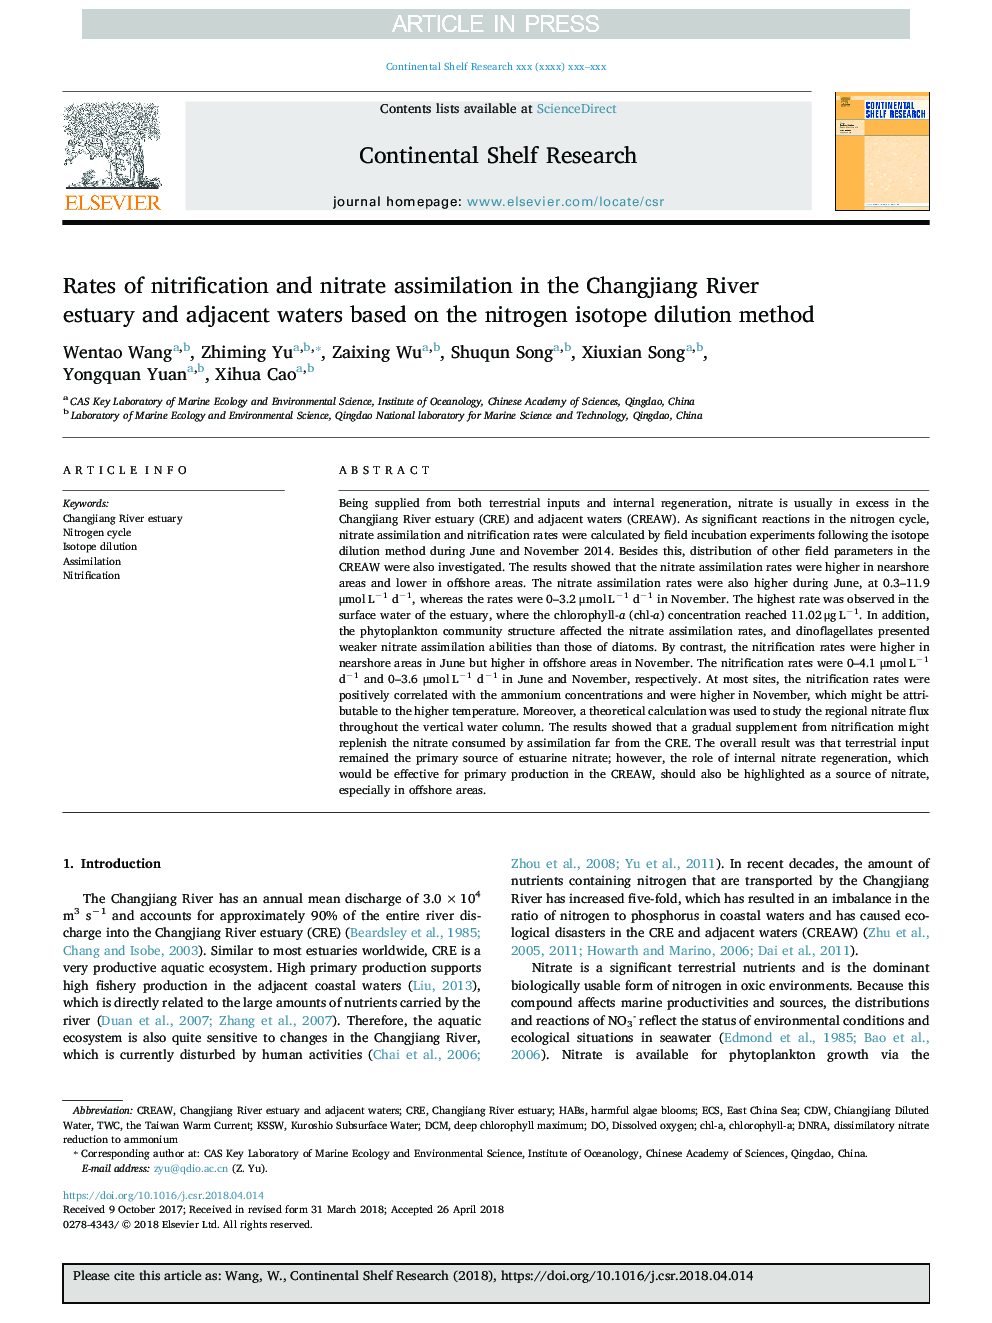 Rates of nitrification and nitrate assimilation in the Changjiang River estuary and adjacent waters based on the nitrogen isotope dilution method